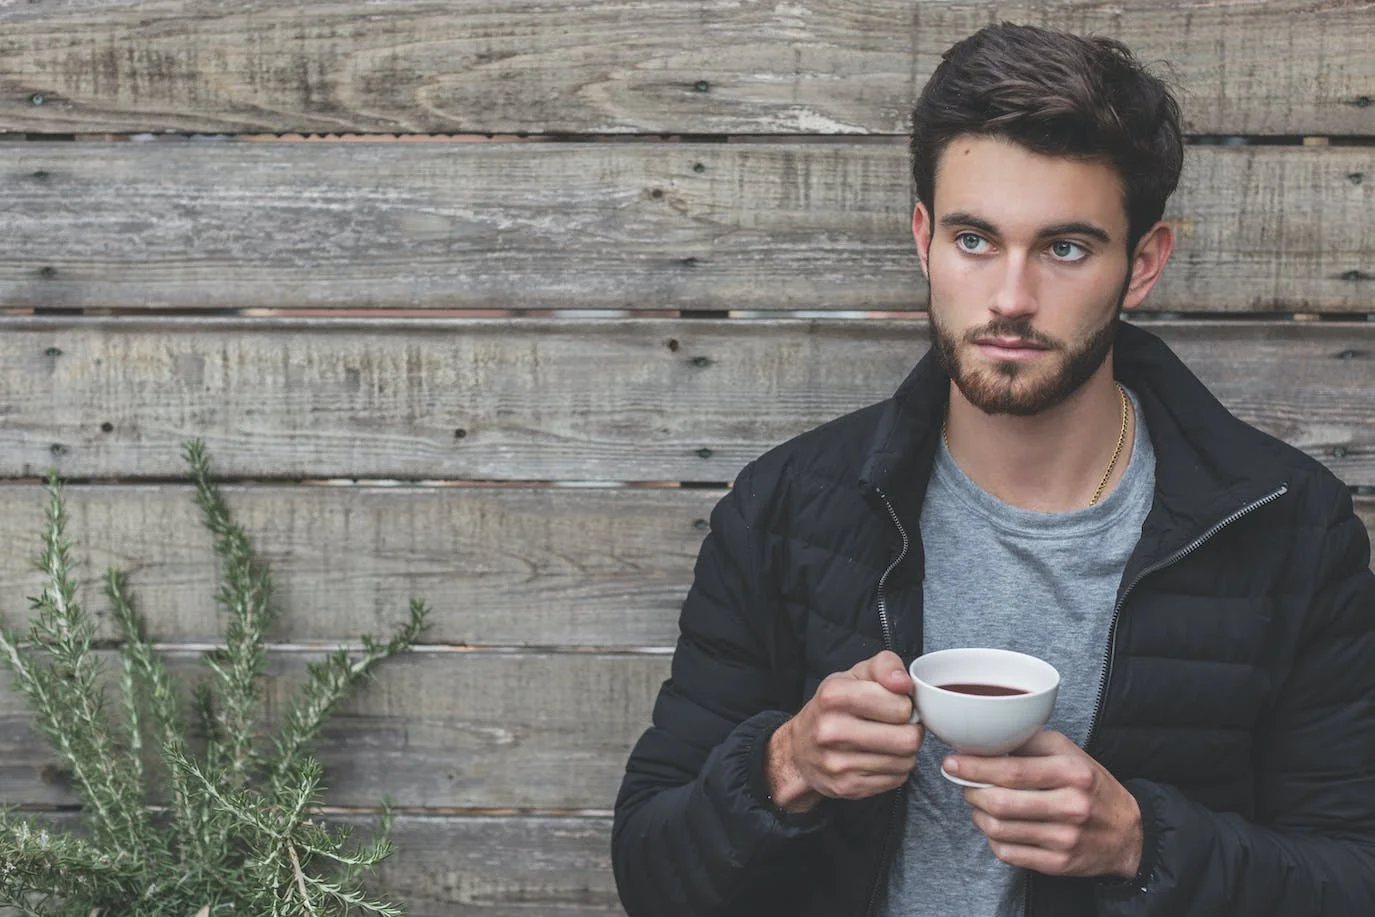 Man photo : a photography of a dark-haired man with green eyes posed in front of a gray pallet wood exterior wall, wearing a thin gold chain, a blue-gray wool sweater with a round neck, and a navy blue down jacket, holding a cup of hot chocolate with both hands.